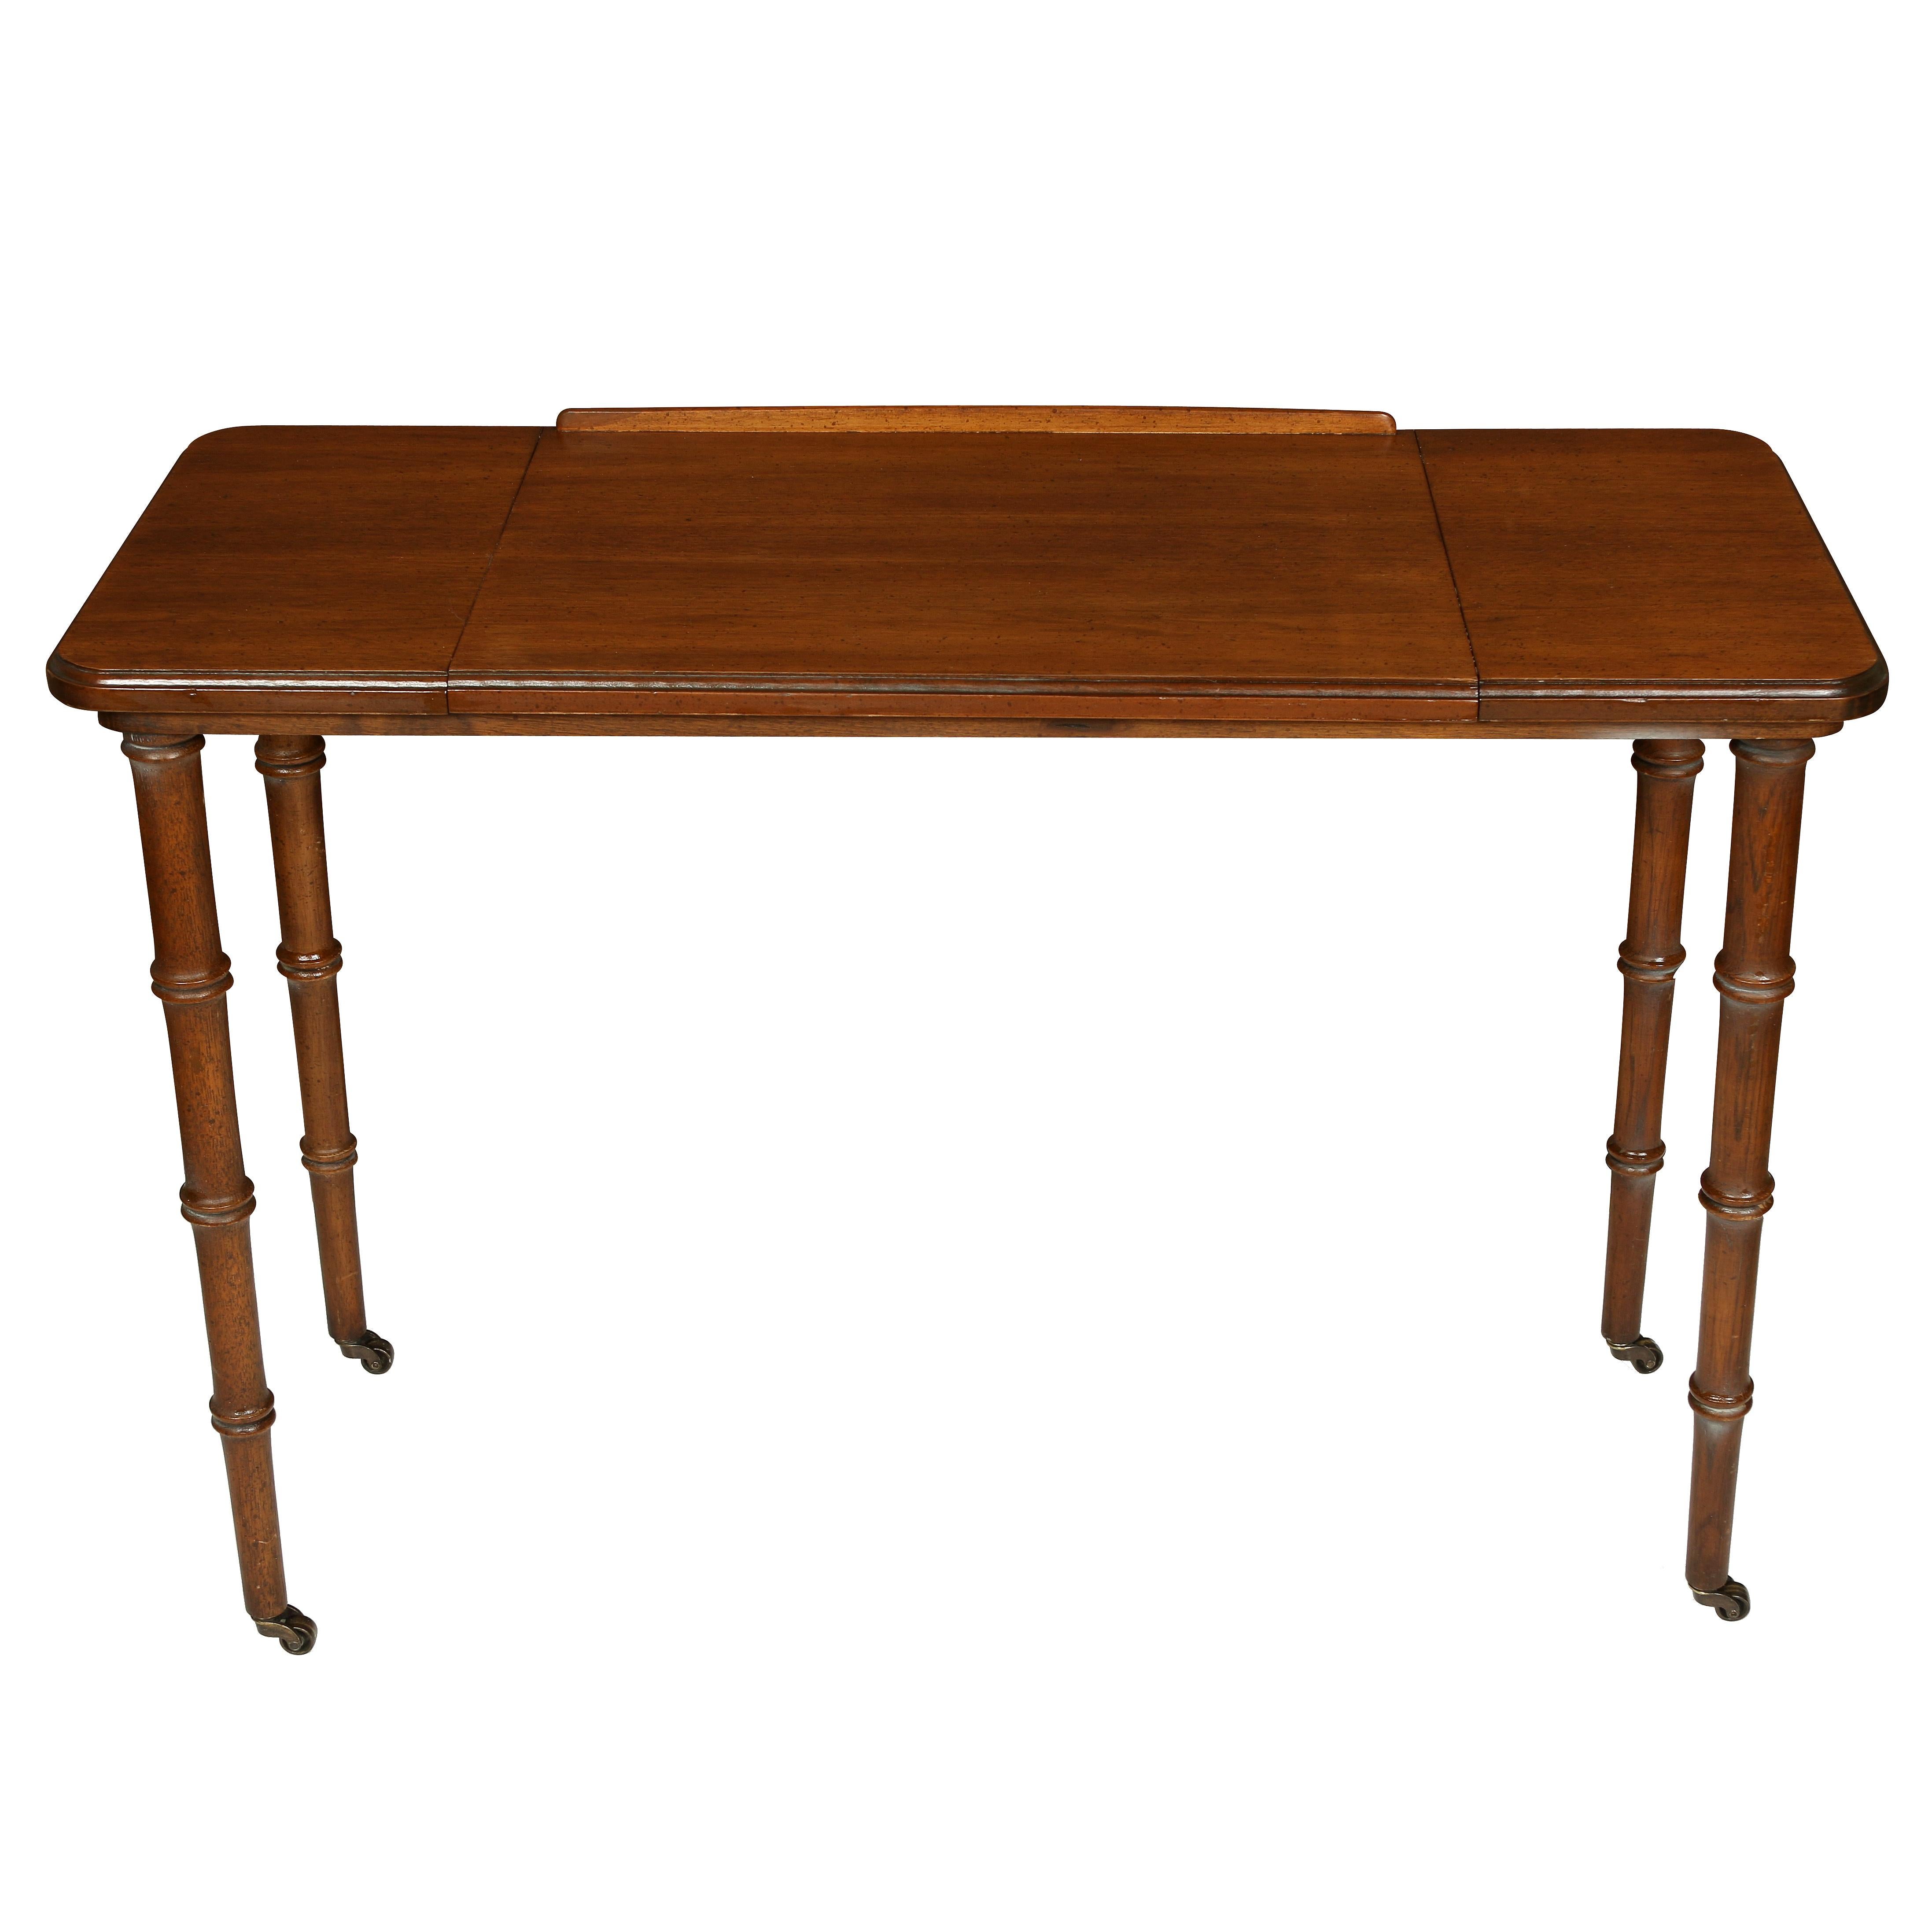 Antique mahogany architect's table with bamboo shaped legs and caster wheels.